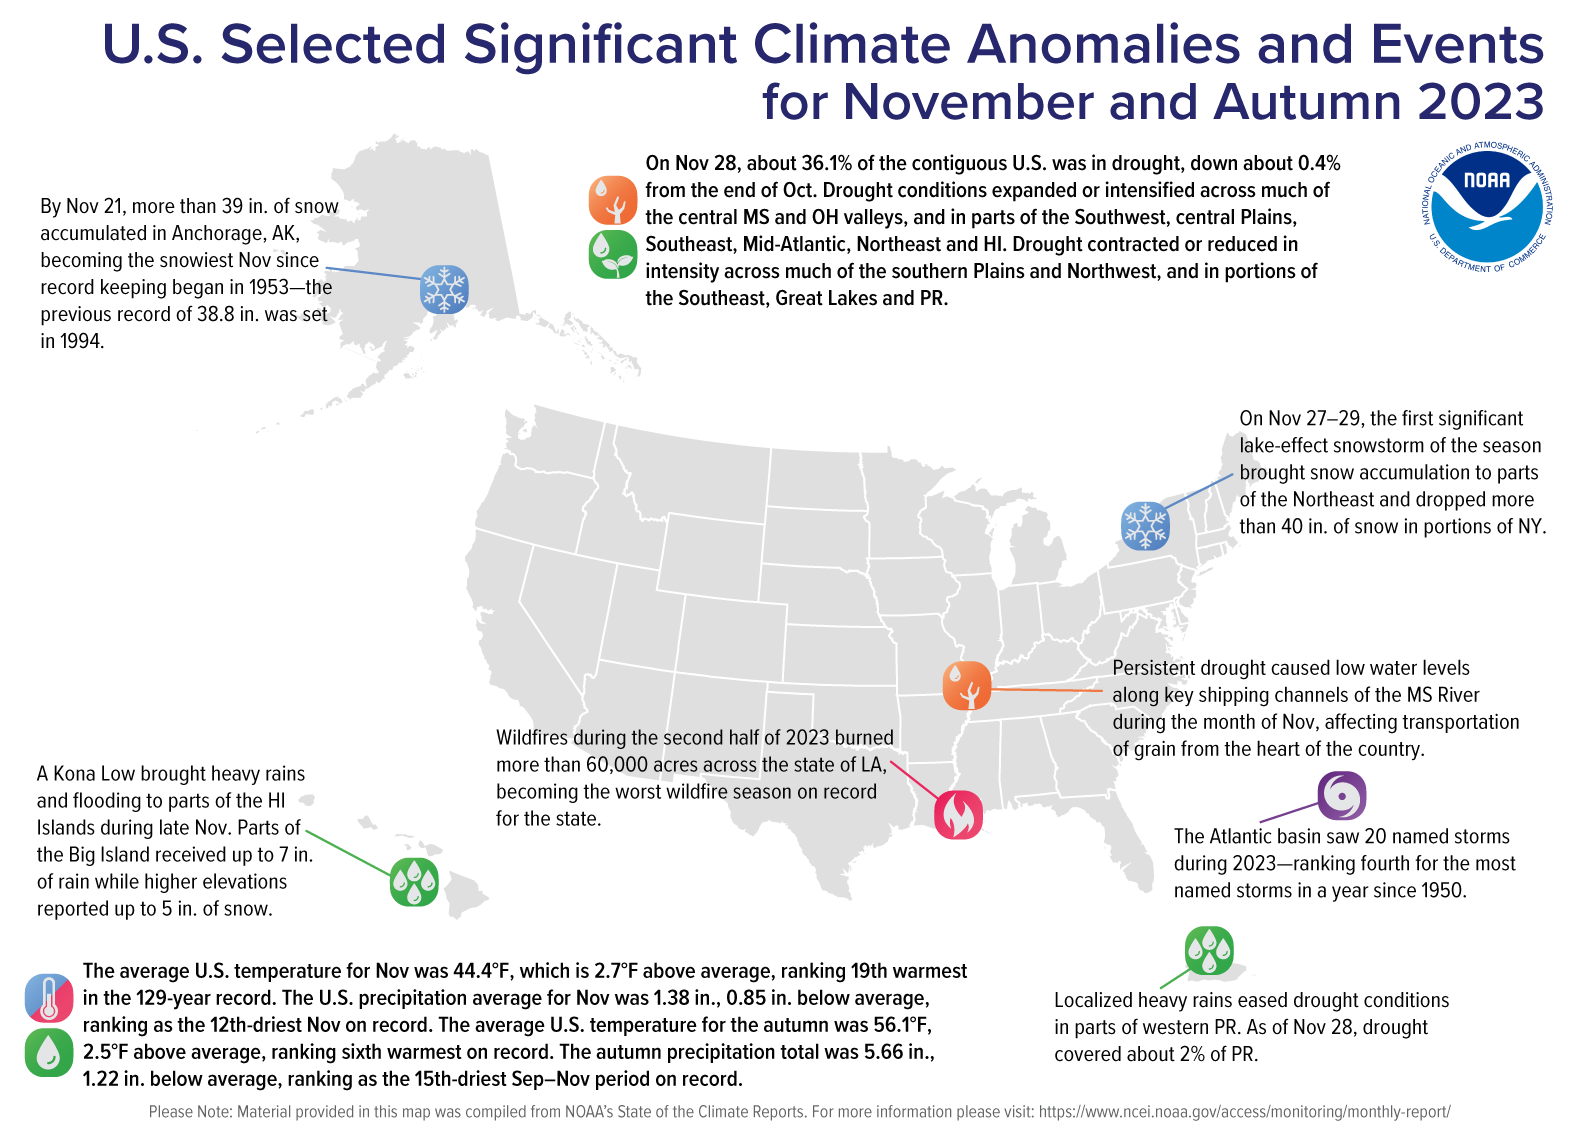 A map of the U.S. plotted with significant climate events that occurred during October 2023. Please see the story below as well as more details in the report summary from NOAA NCEI at http://bit.ly/USClimate202311.